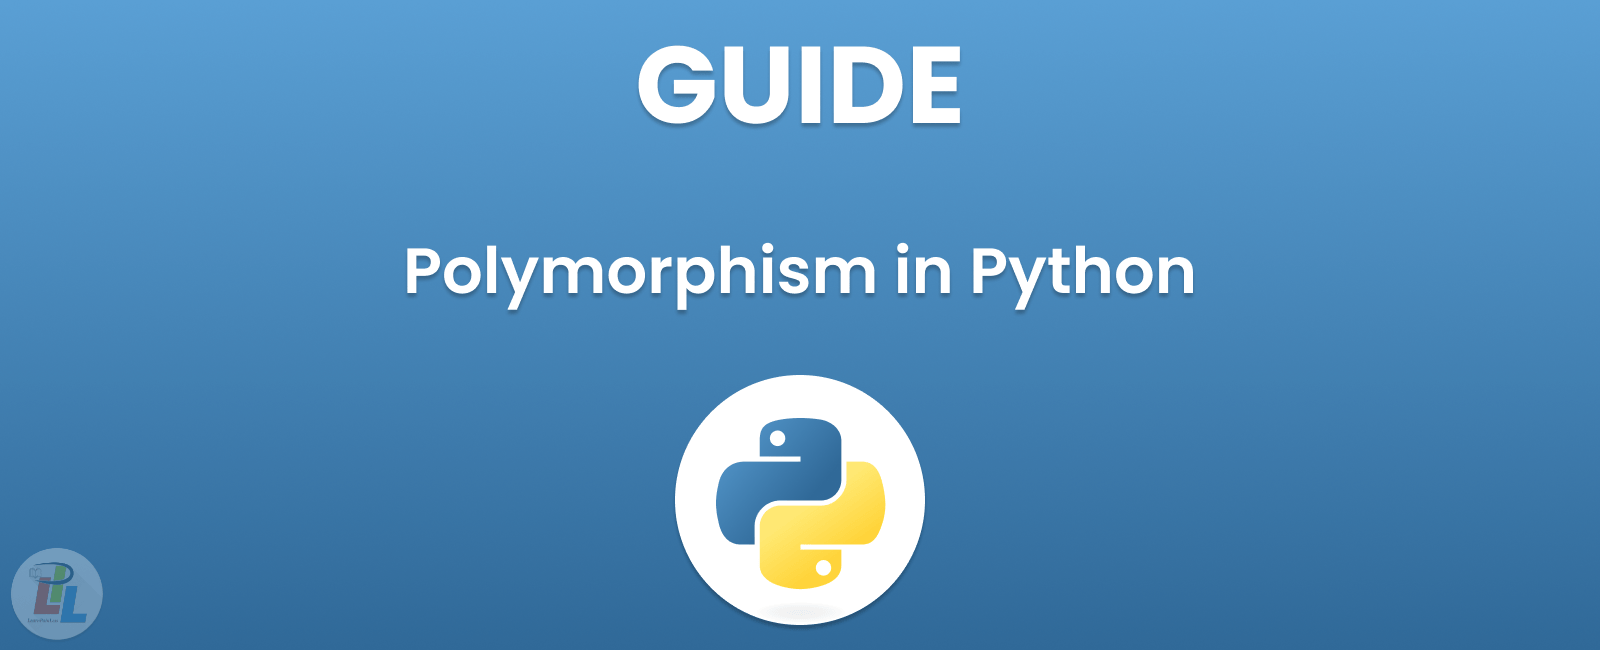 Polymorphism in Python: Exploring the Concepts and Their Applications